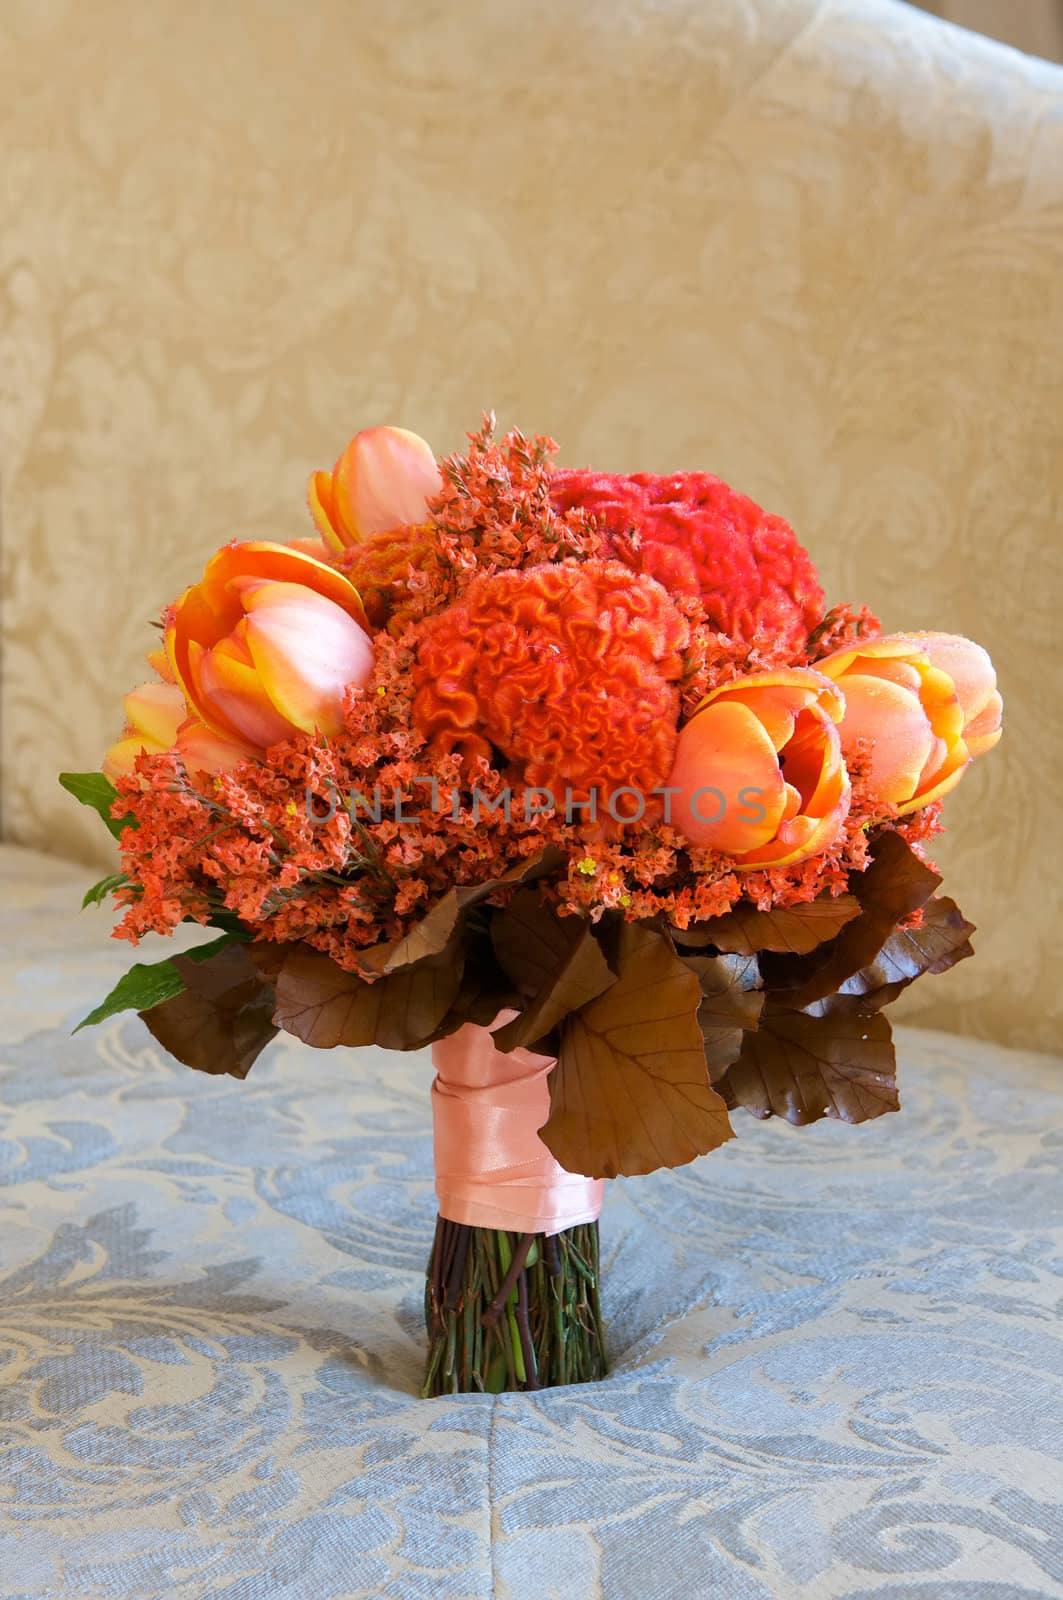 A colorful red and orange bridal bouquet of flowers by Deimages